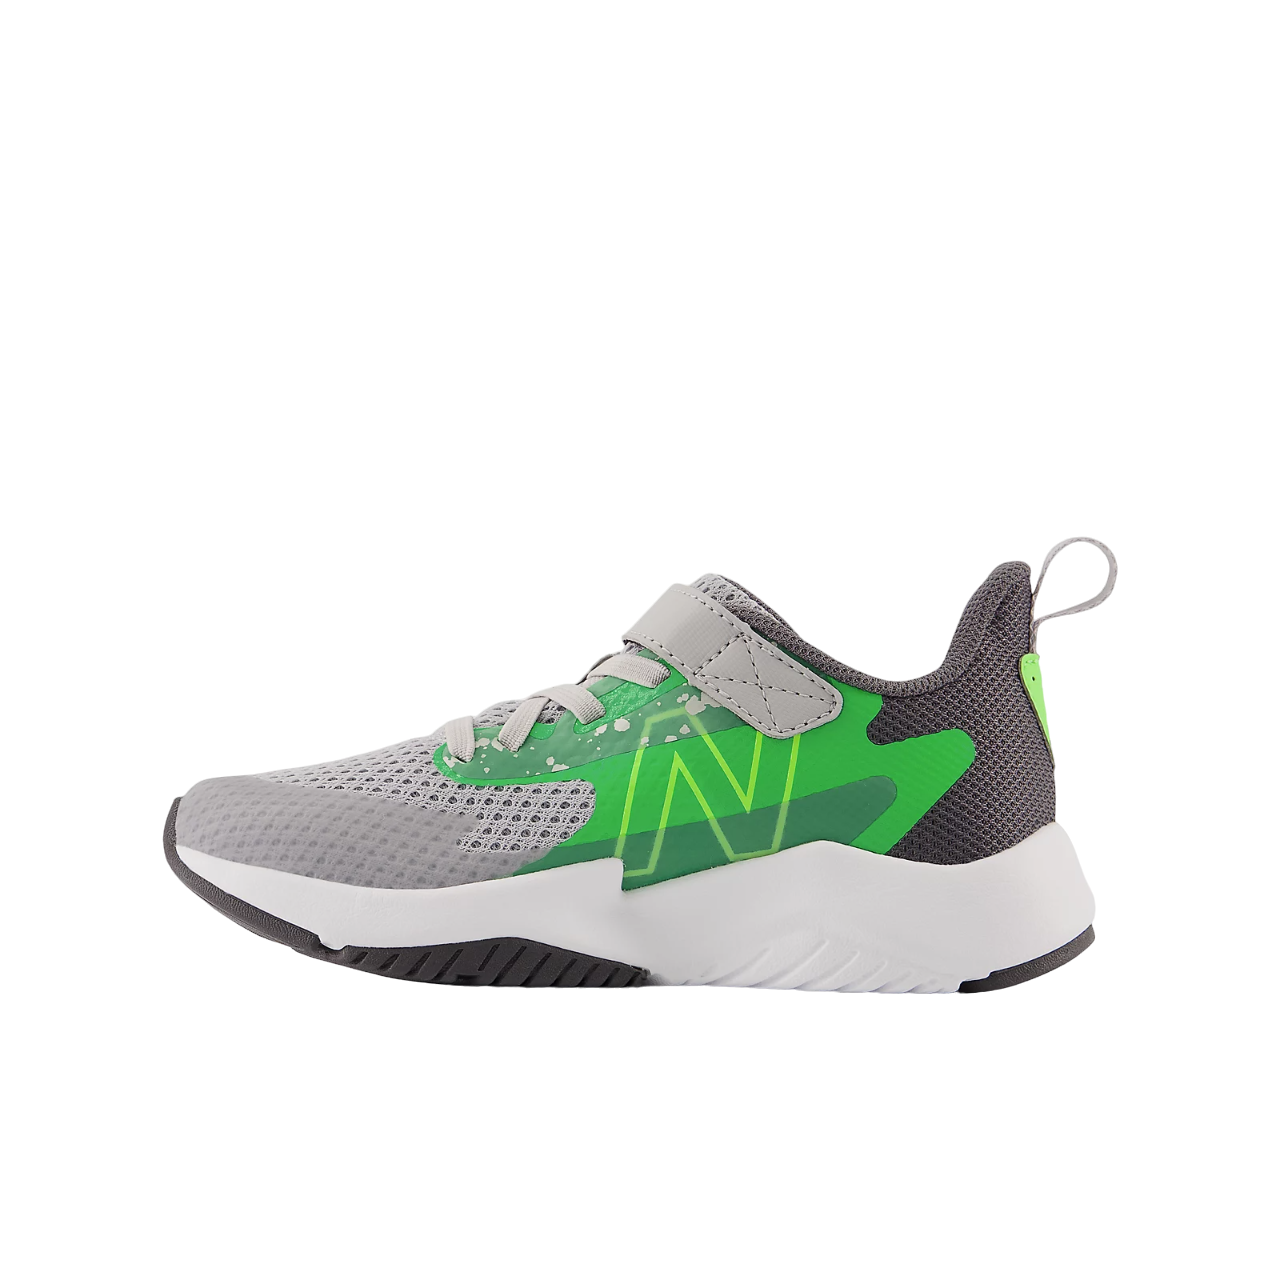 Rave Run v2 Bungee Lace with Top Strap Raincloud Green (10.5c-3Y)